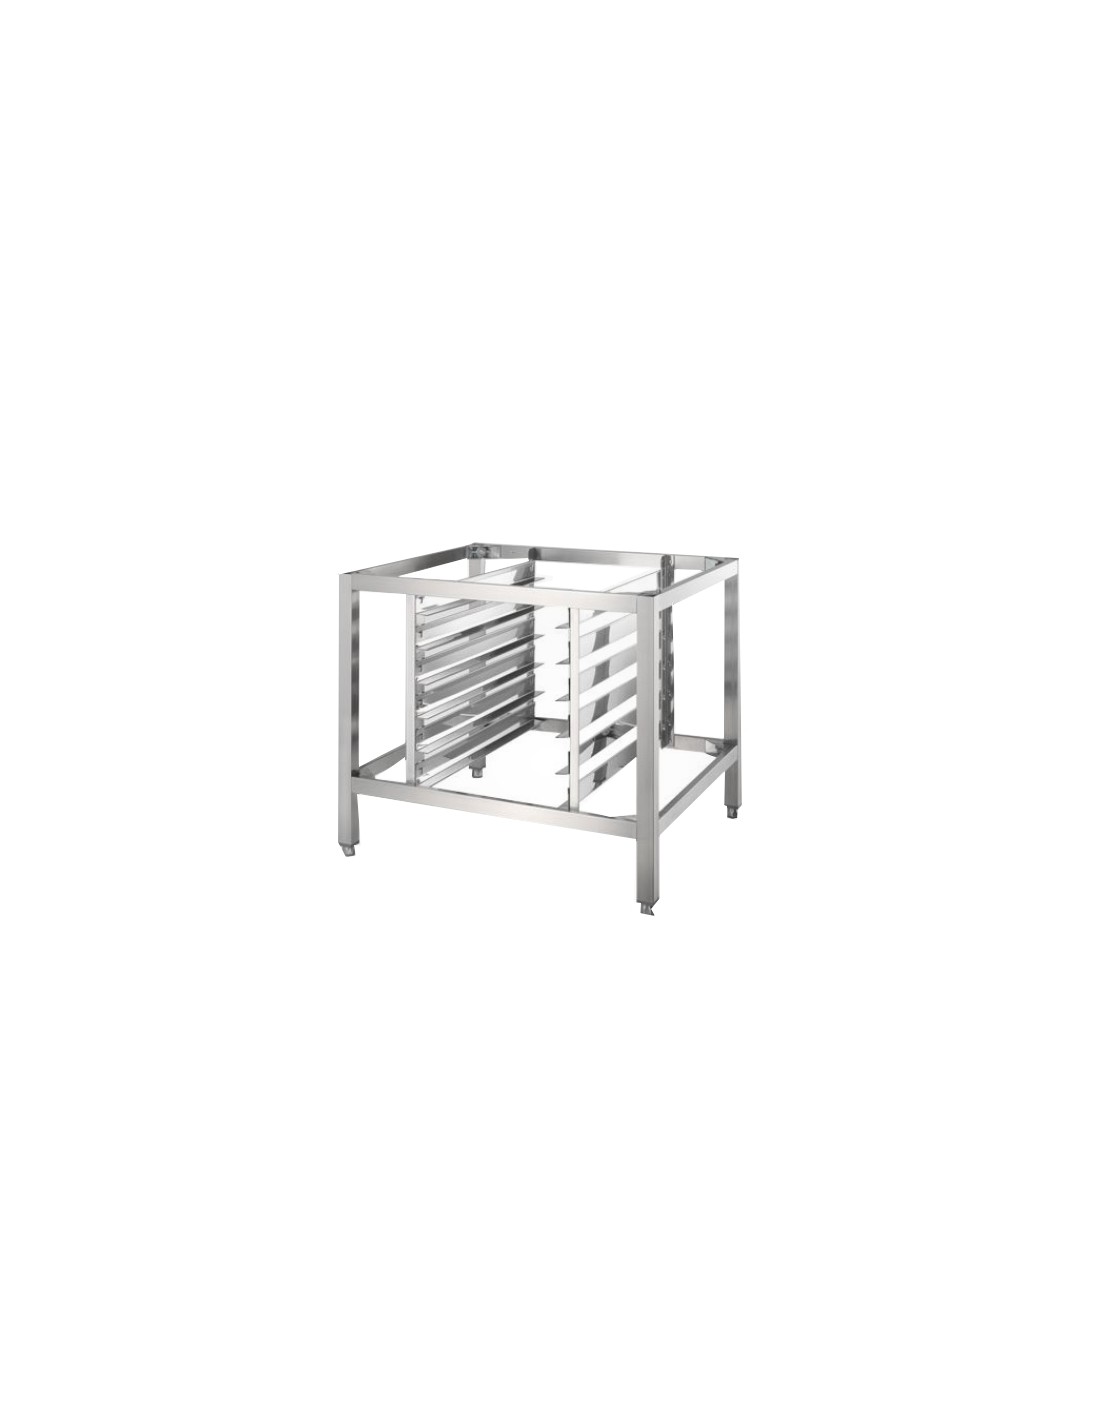 Stainless steel support with Gourmet Slim h100-8 shelves